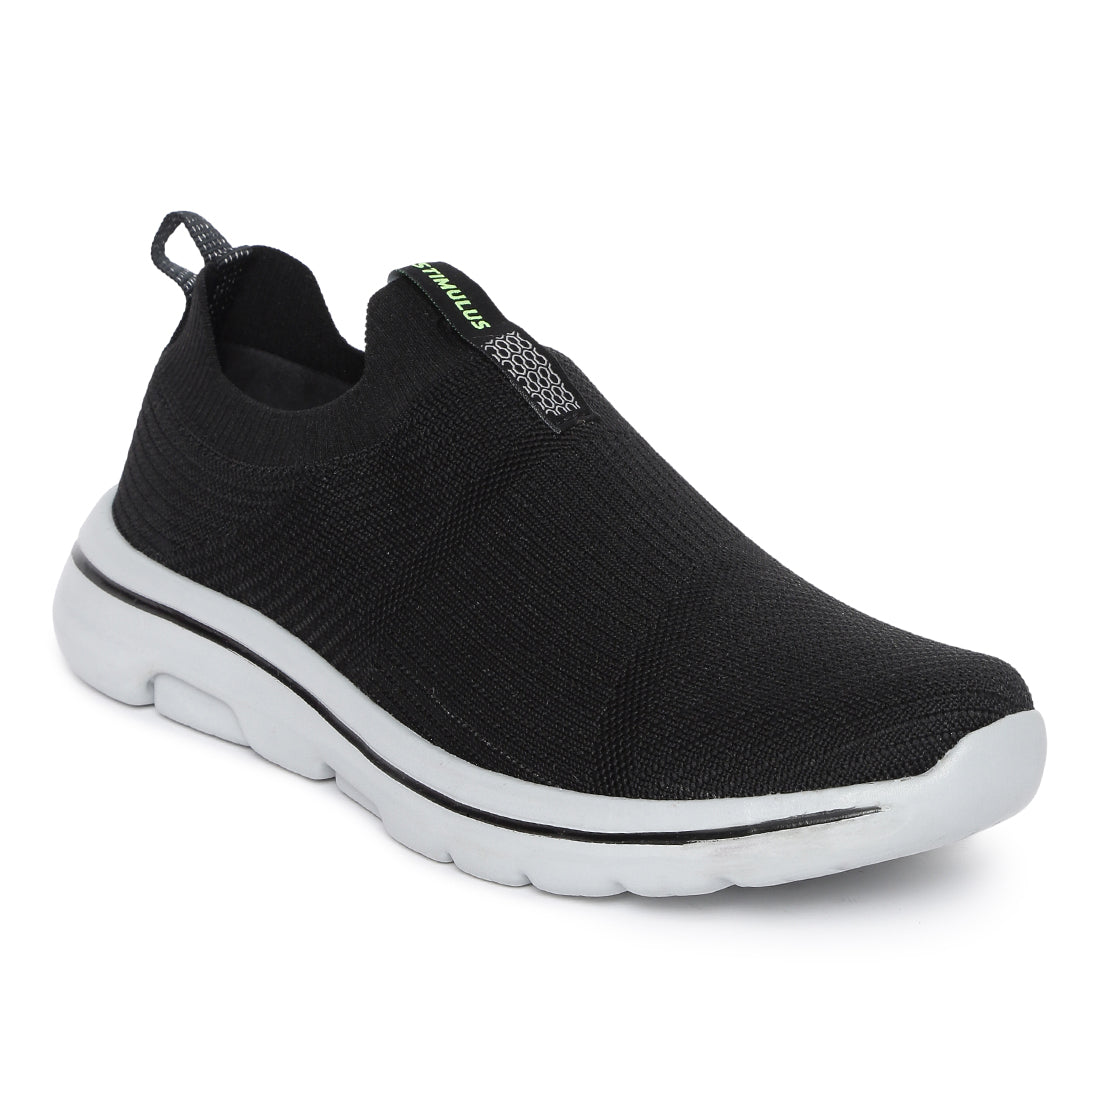 Stimulus FBSTG6032A Black Comfortable Daily Outdoor Knitted Training Shoes for Men